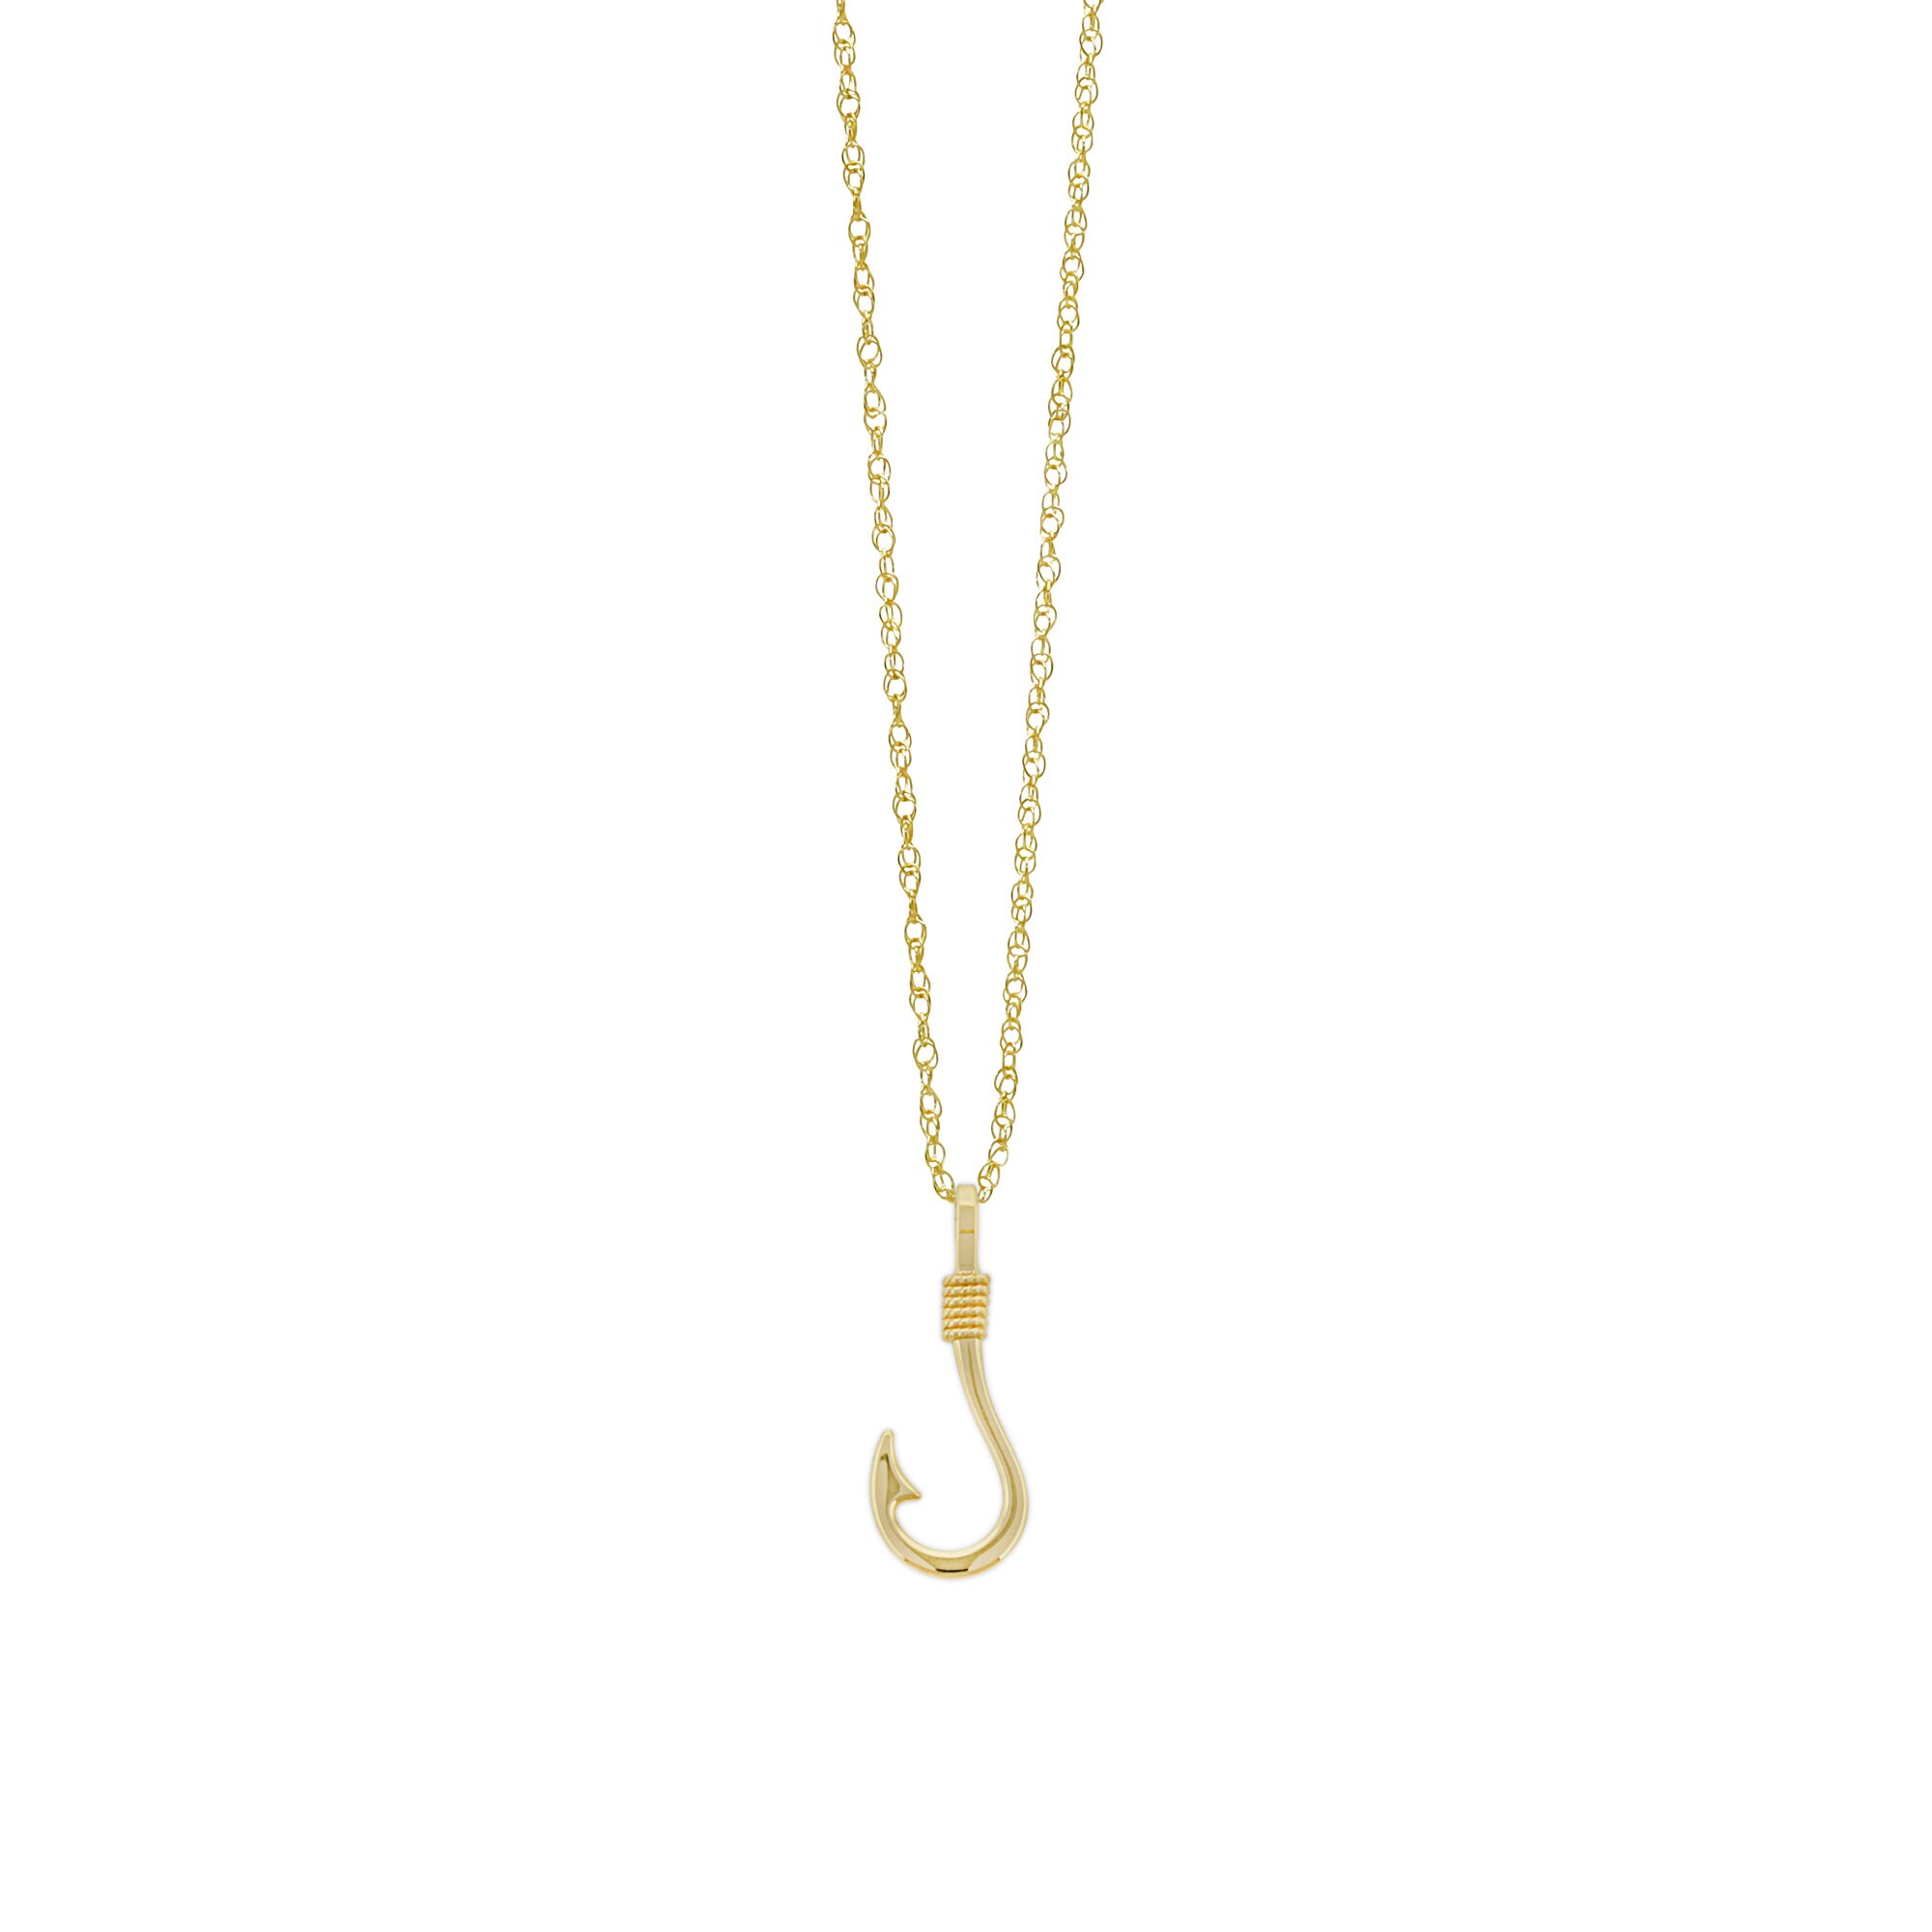 Gold Fish Hook Charm - 10 Karat Solid Gold with Optional Gold Chain- Fish Hook Necklace - Hook Pendant